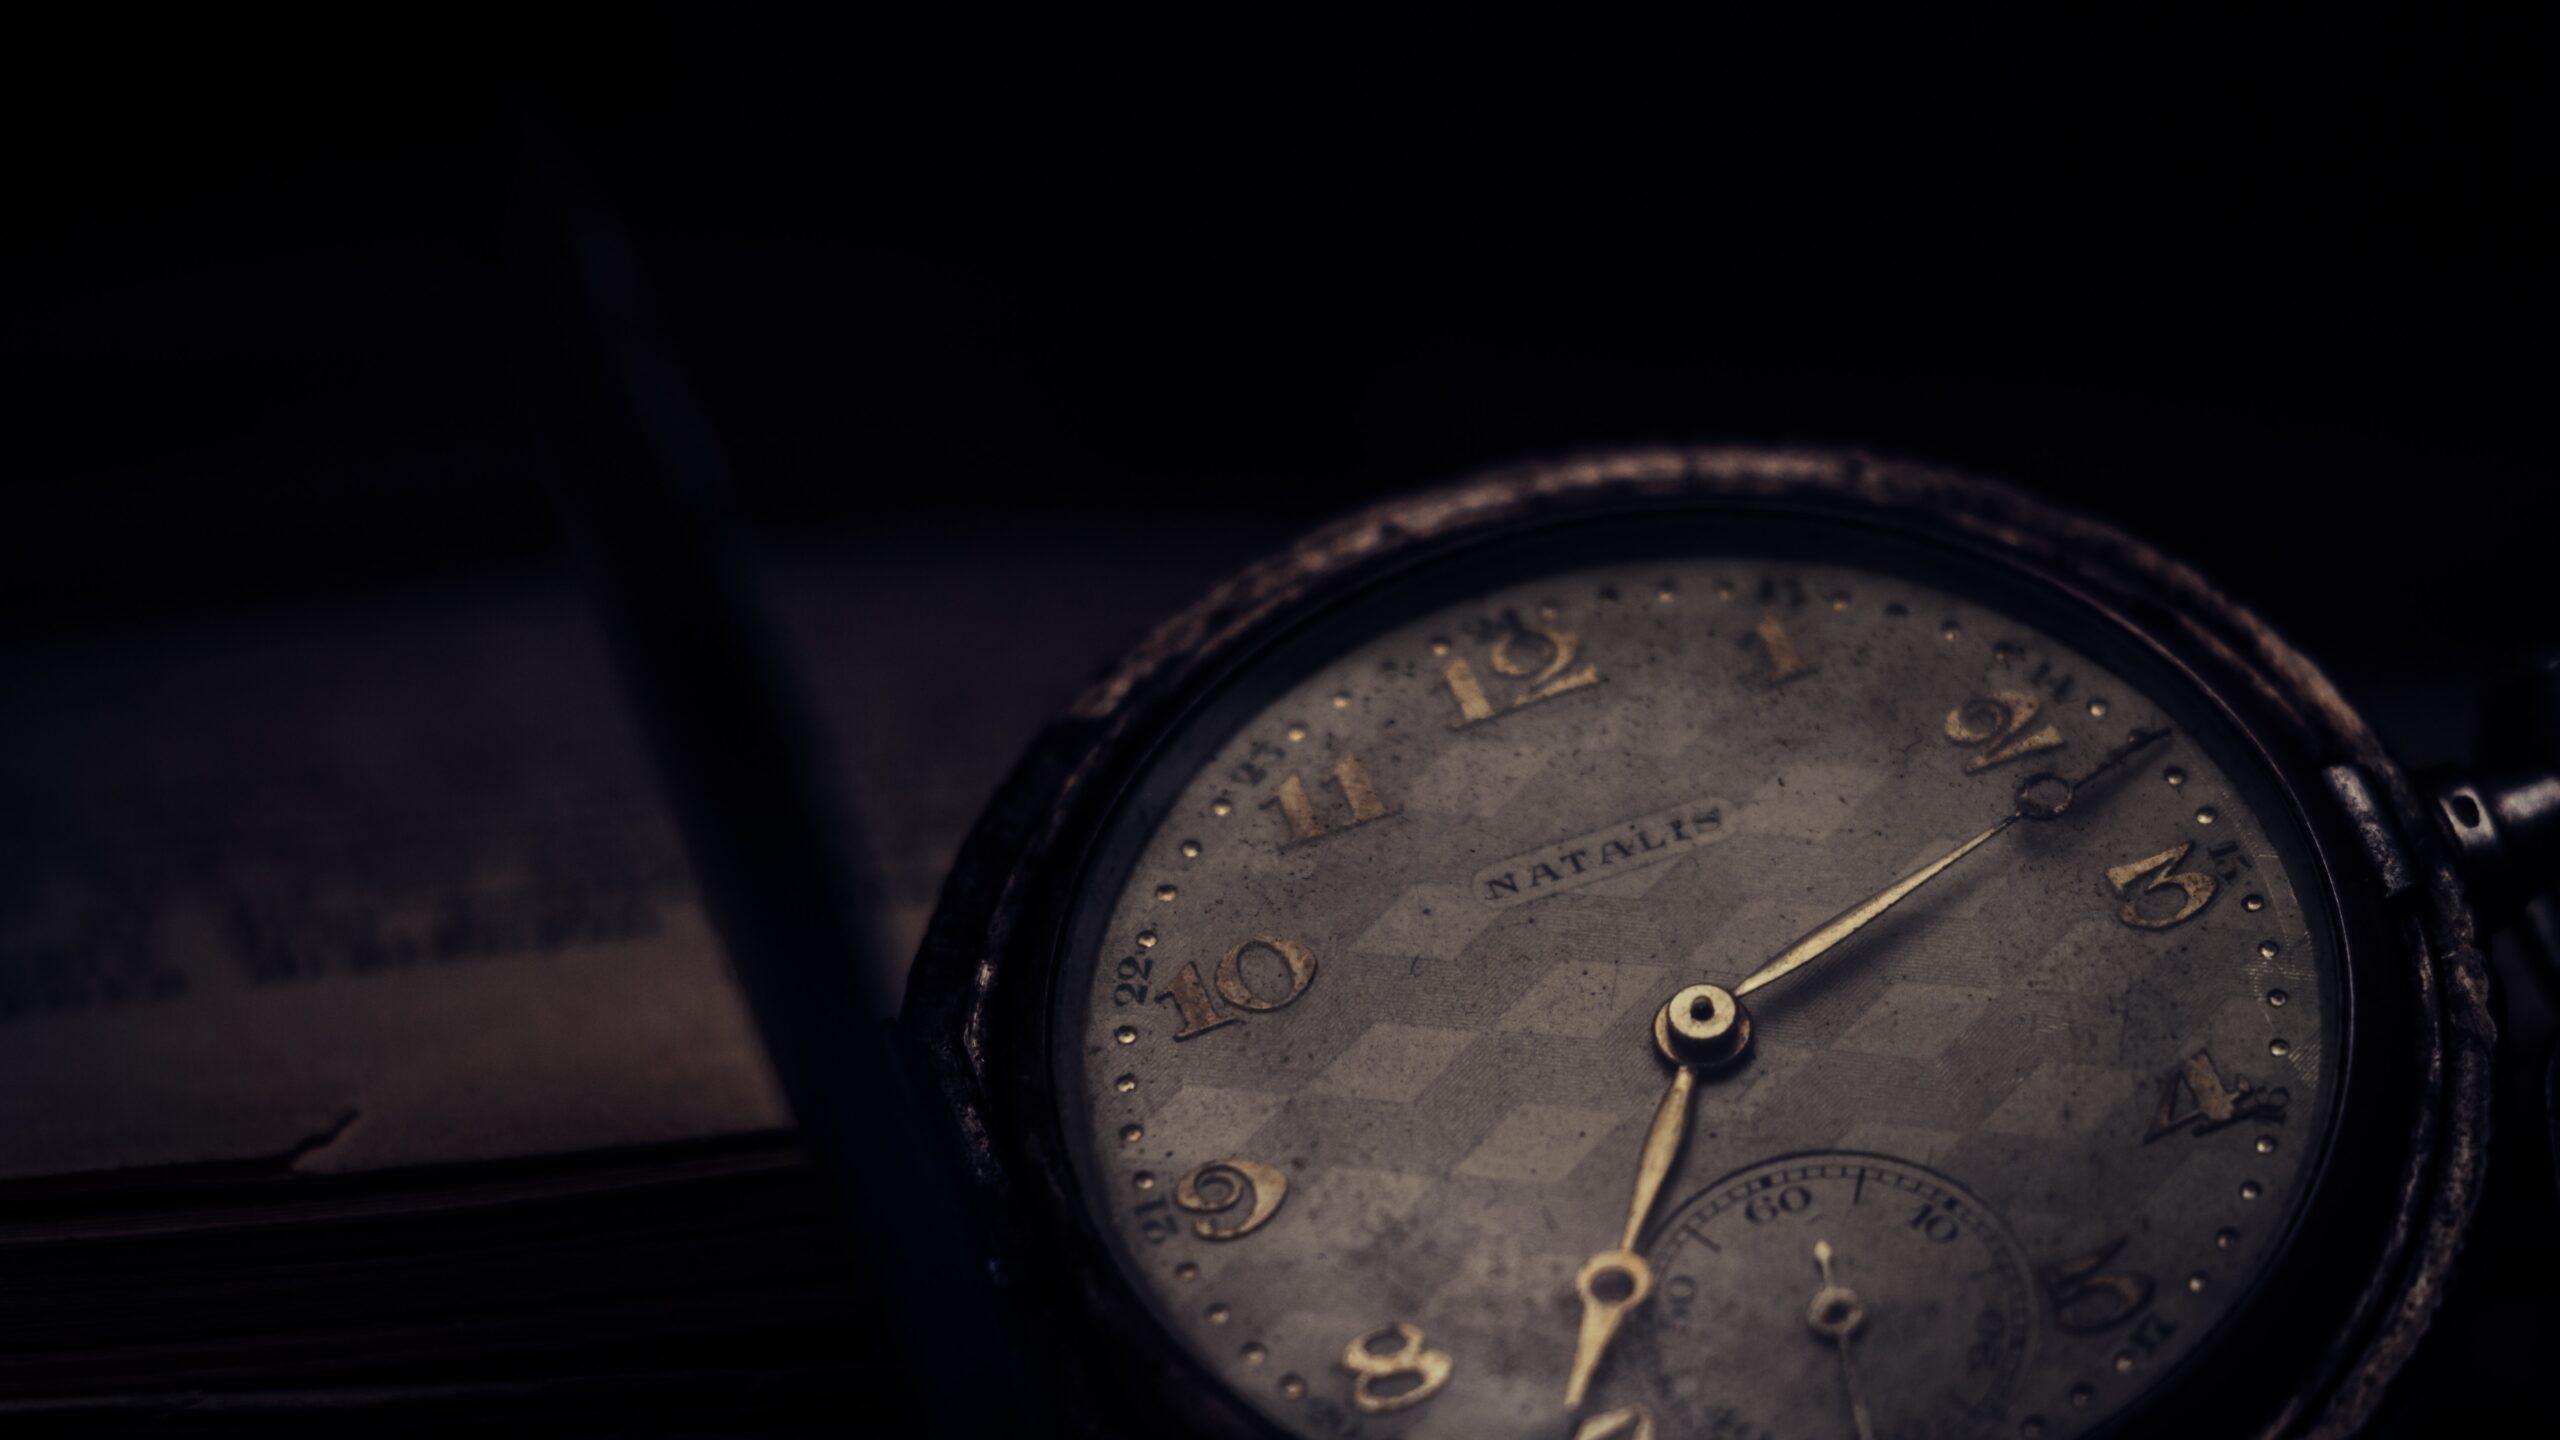 photo by Photo by Matej: https://www.pexels.com/photo/close-up-photography-of-vintage-watch-1034425/